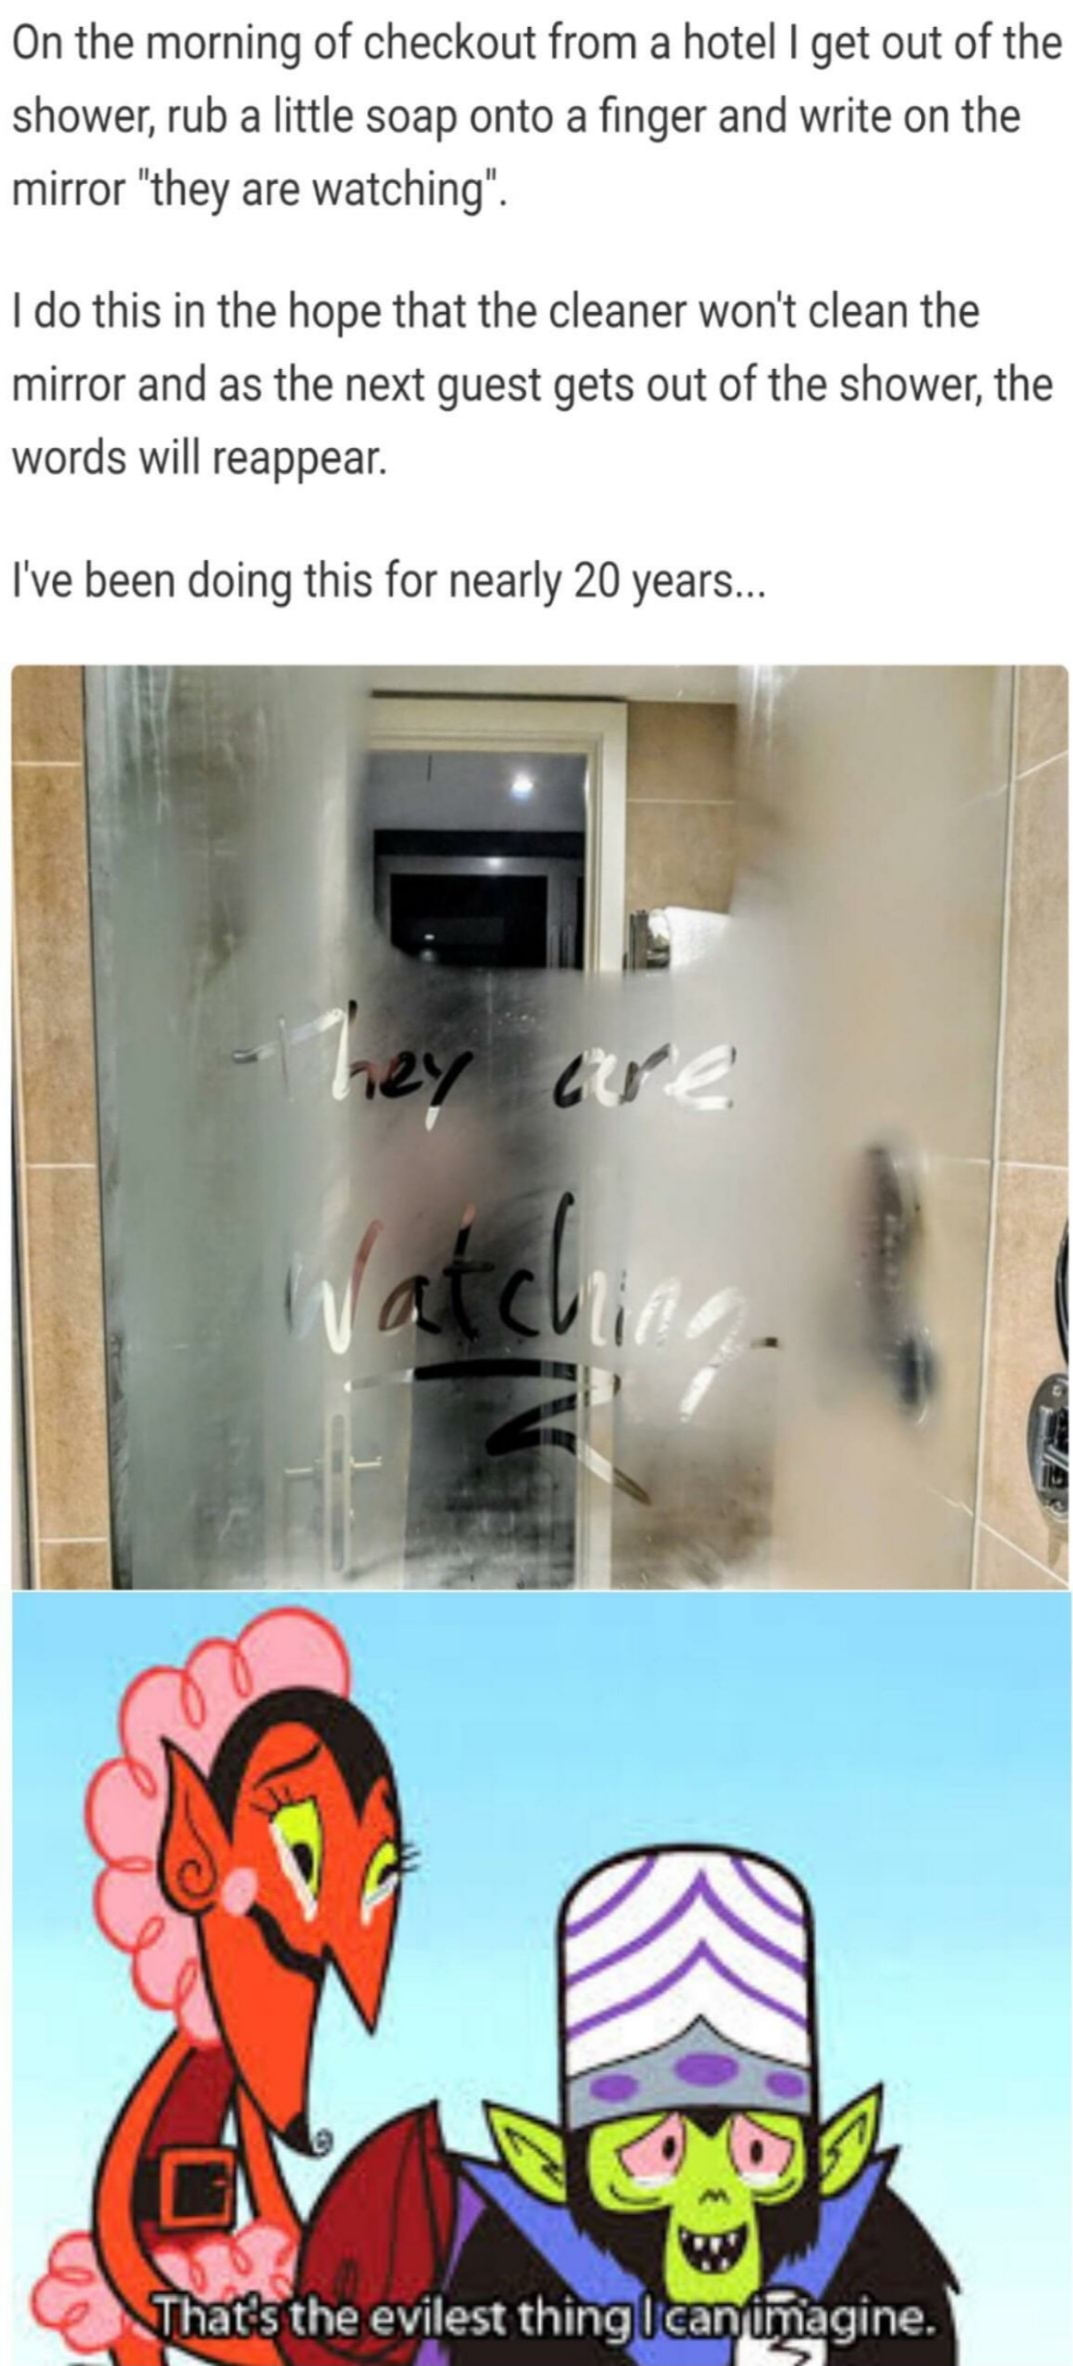 evilest memes - On the morning of checkout from a hotel I get out of the shower, rub a little soap onto a finger and write on the mirror "they are watching I do this in the hope that the cleaner won't clean the mirror and as the next guest gets out of the